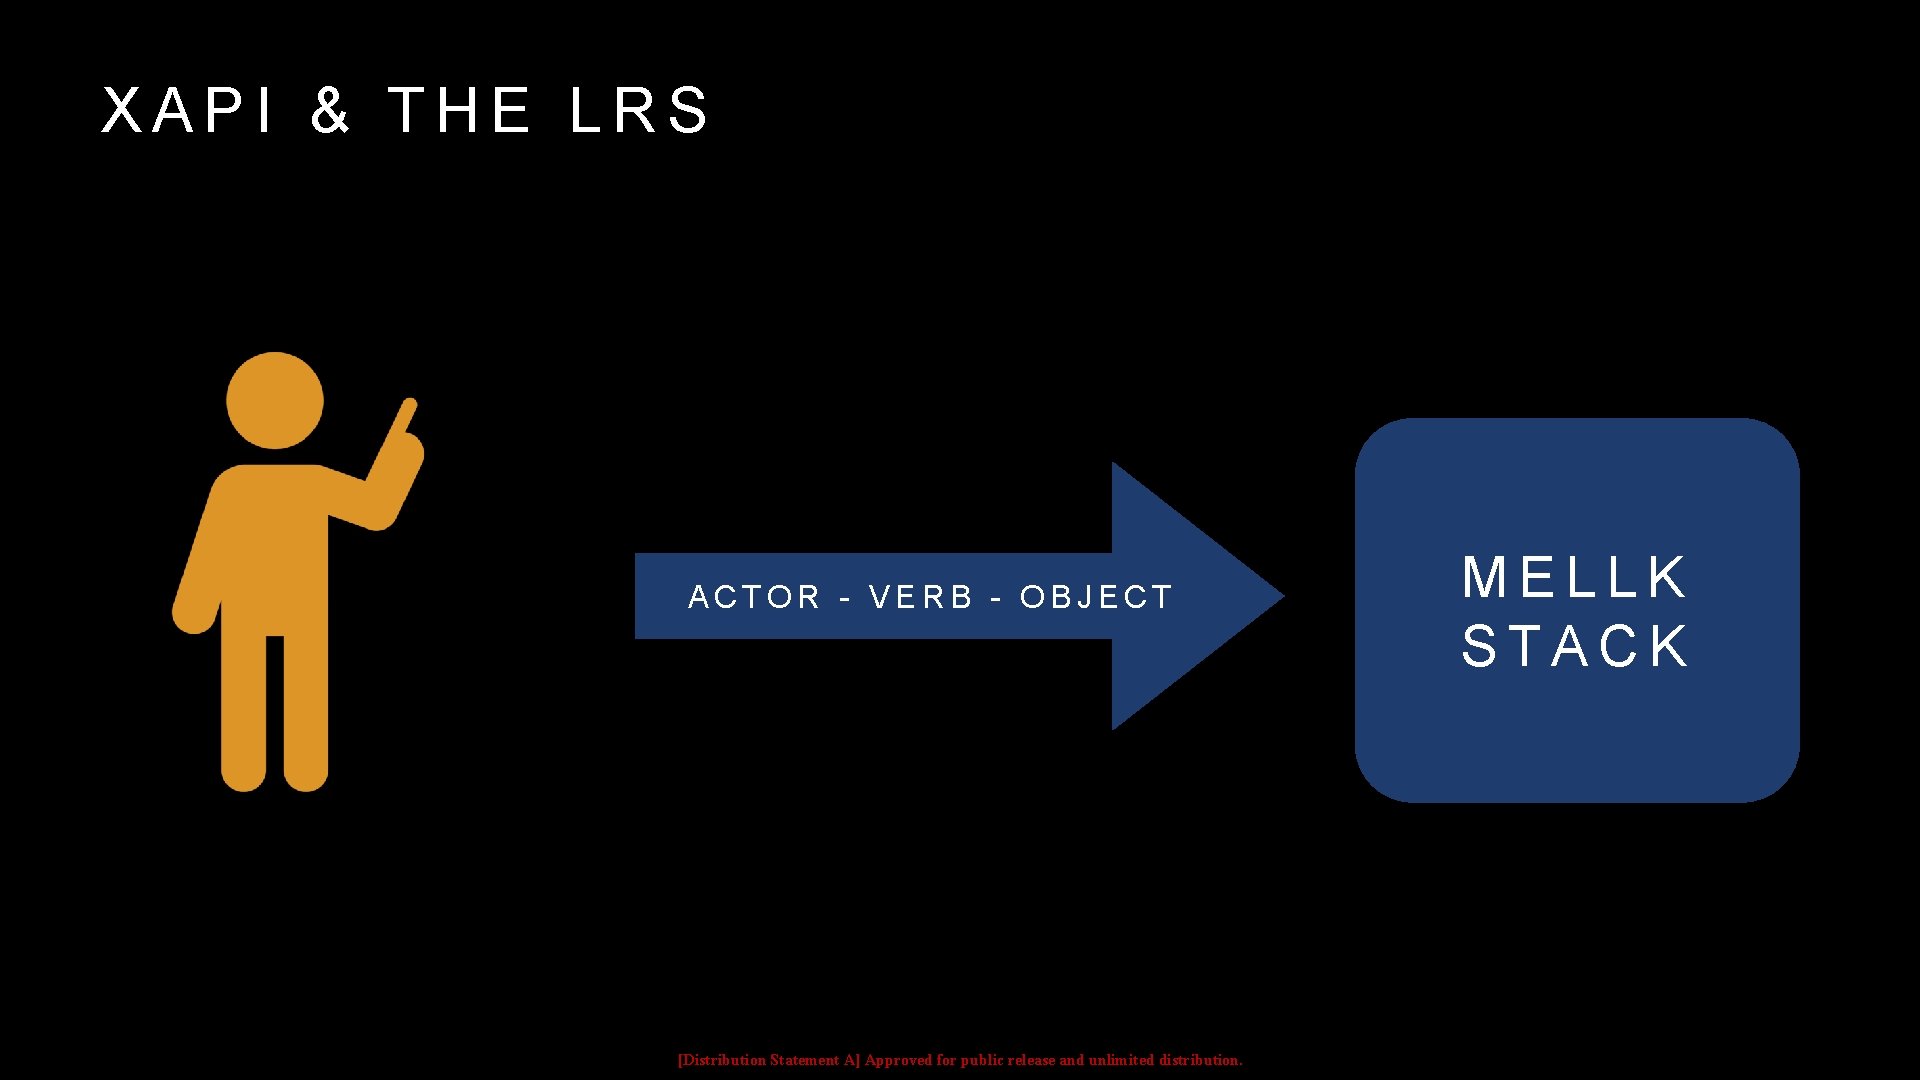 XAPI & THE LRS ACTOR - VERB - OBJECT [Distribution Statement A] Approved for